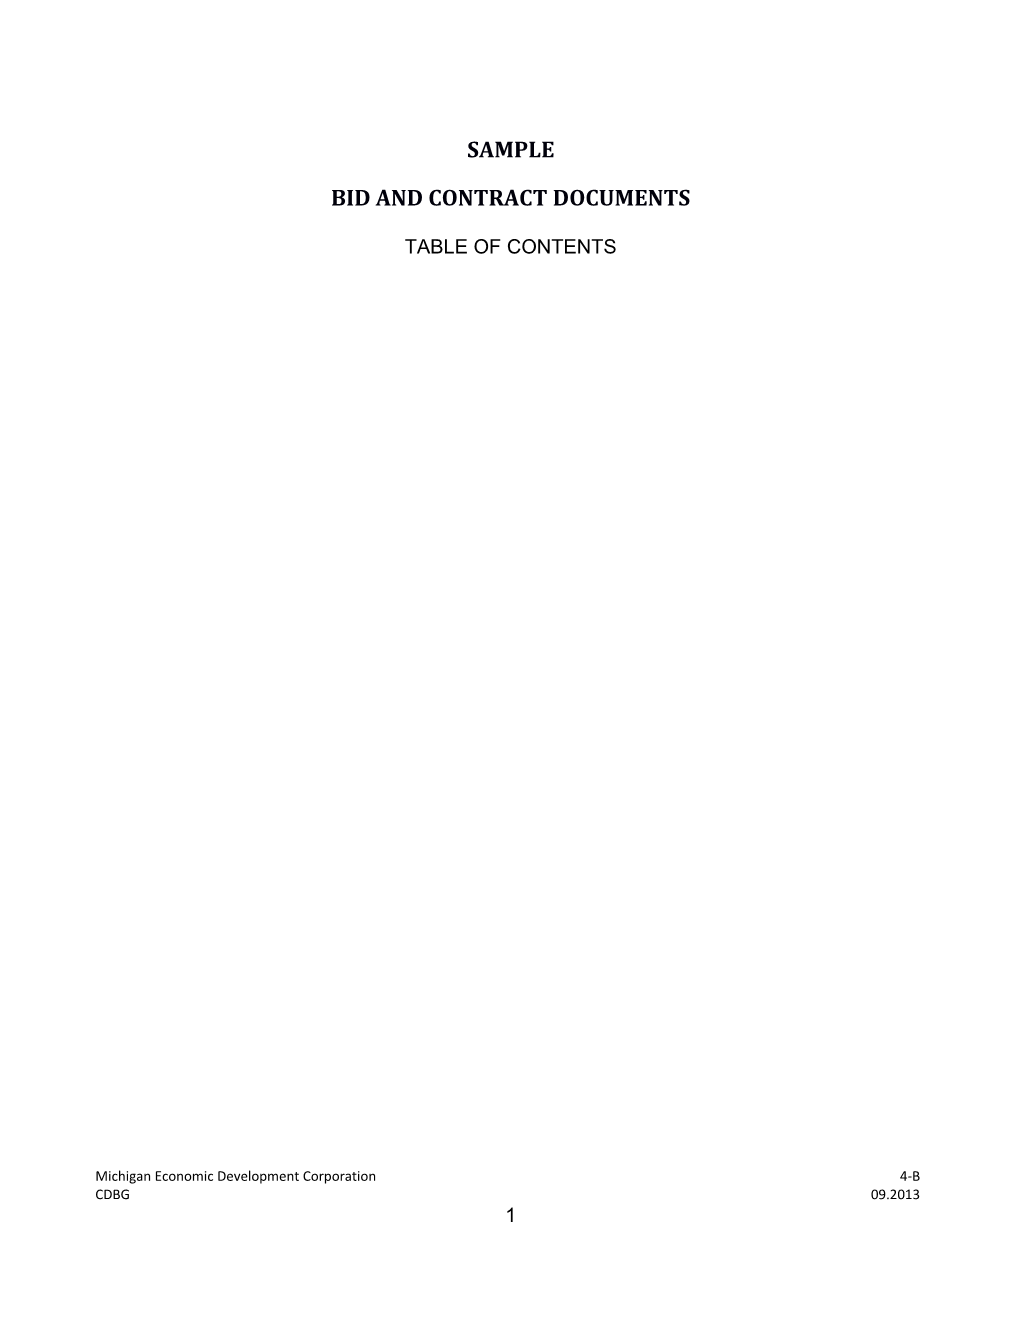 Bid and Contract Documents